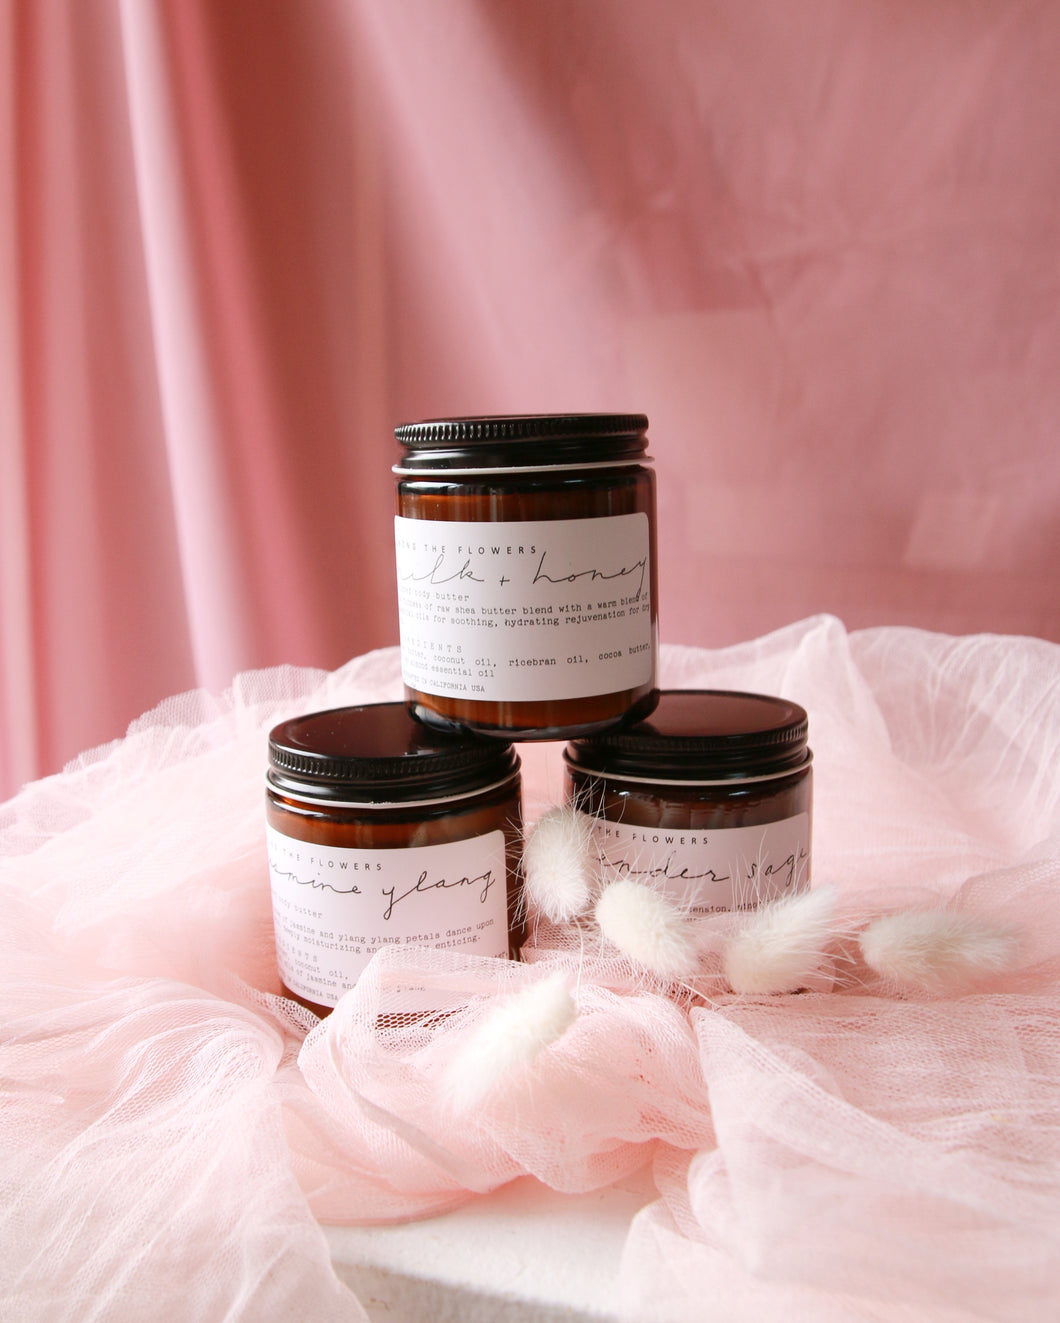 Among the Flowers | Whipped Body Butter